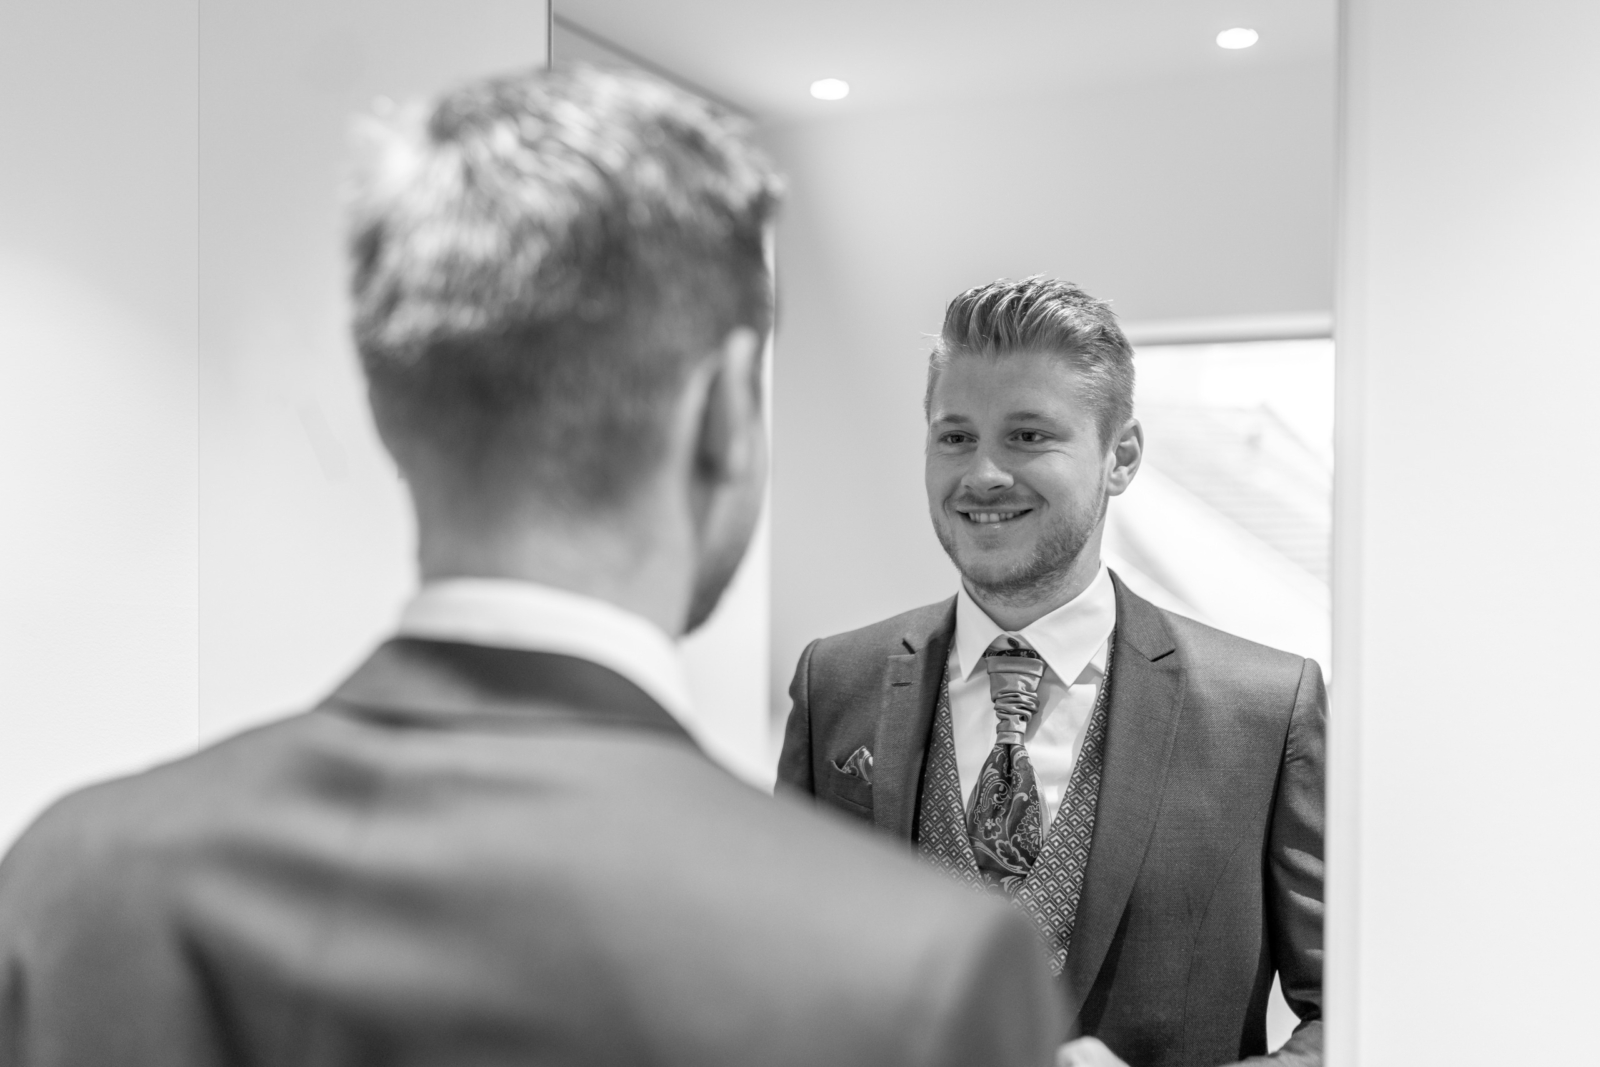 groom getting ready - black and white portrait photo